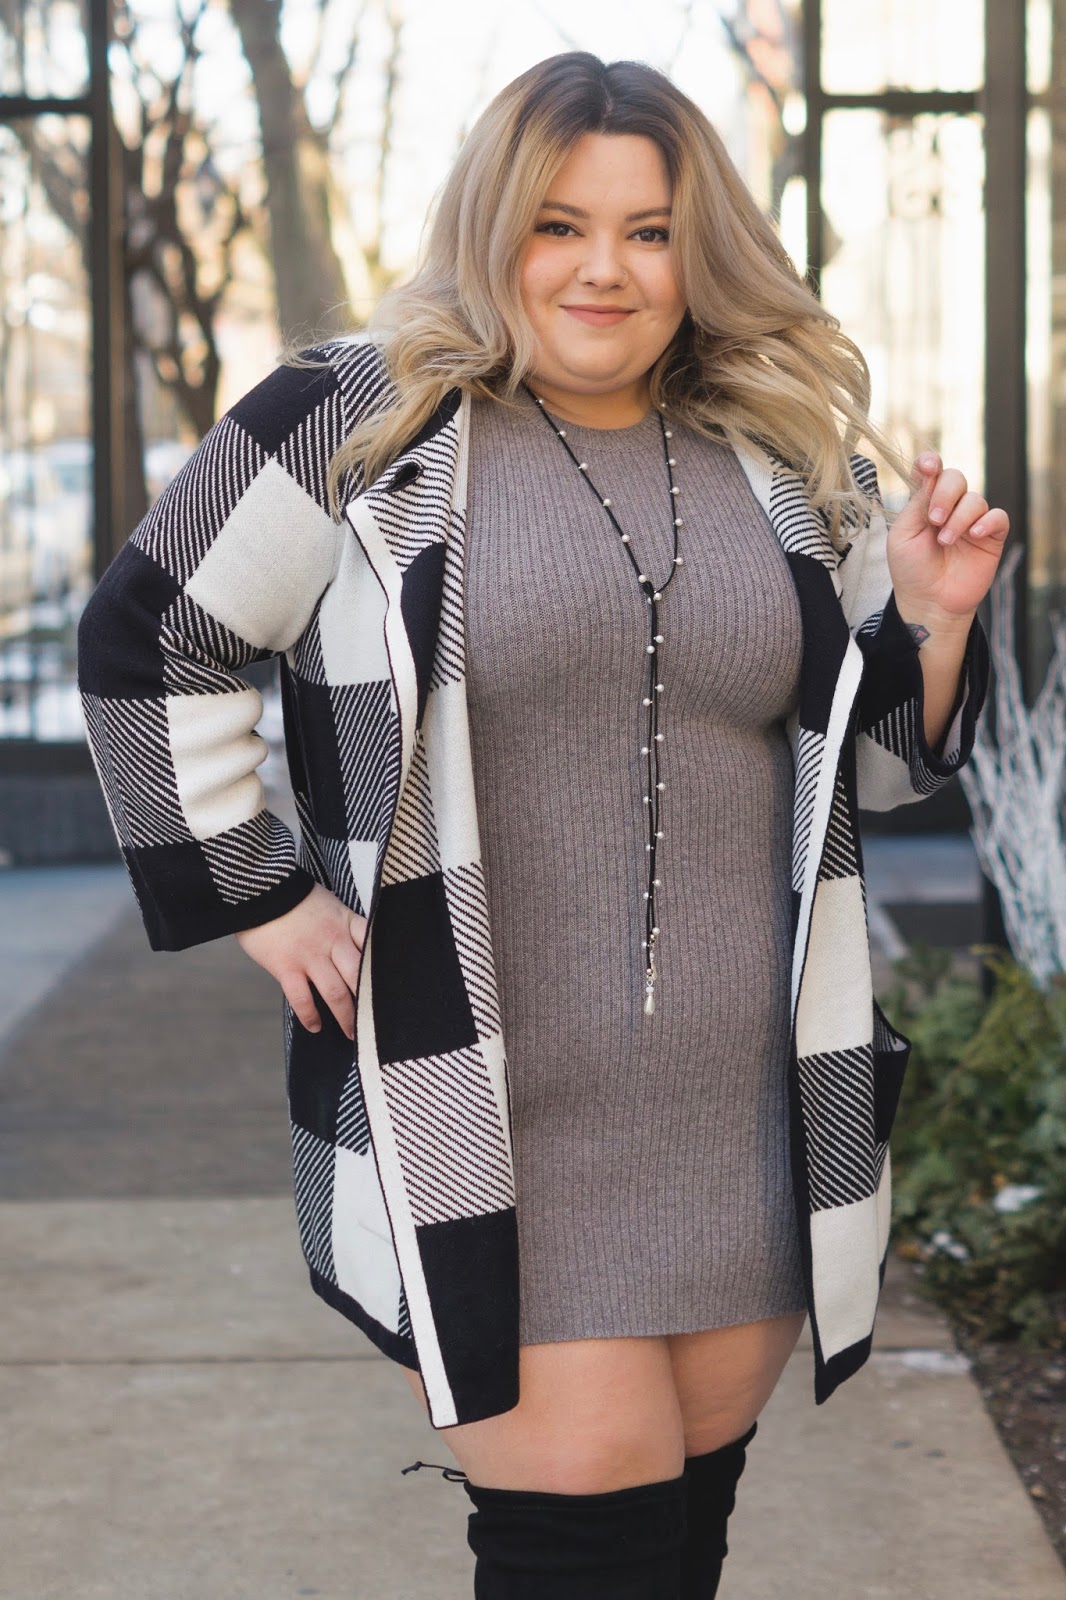 embrace your curves, wide calf over the knee boots, wide calf boots, alfani, macks plus size, affordable plus size clothing, plus size poncho, sweater jacket, Natalie craig, natalie in the city, plus size fashion, Chicago plus size fashion blogger, Chicago model, midwest blogger, eff your beauty standards